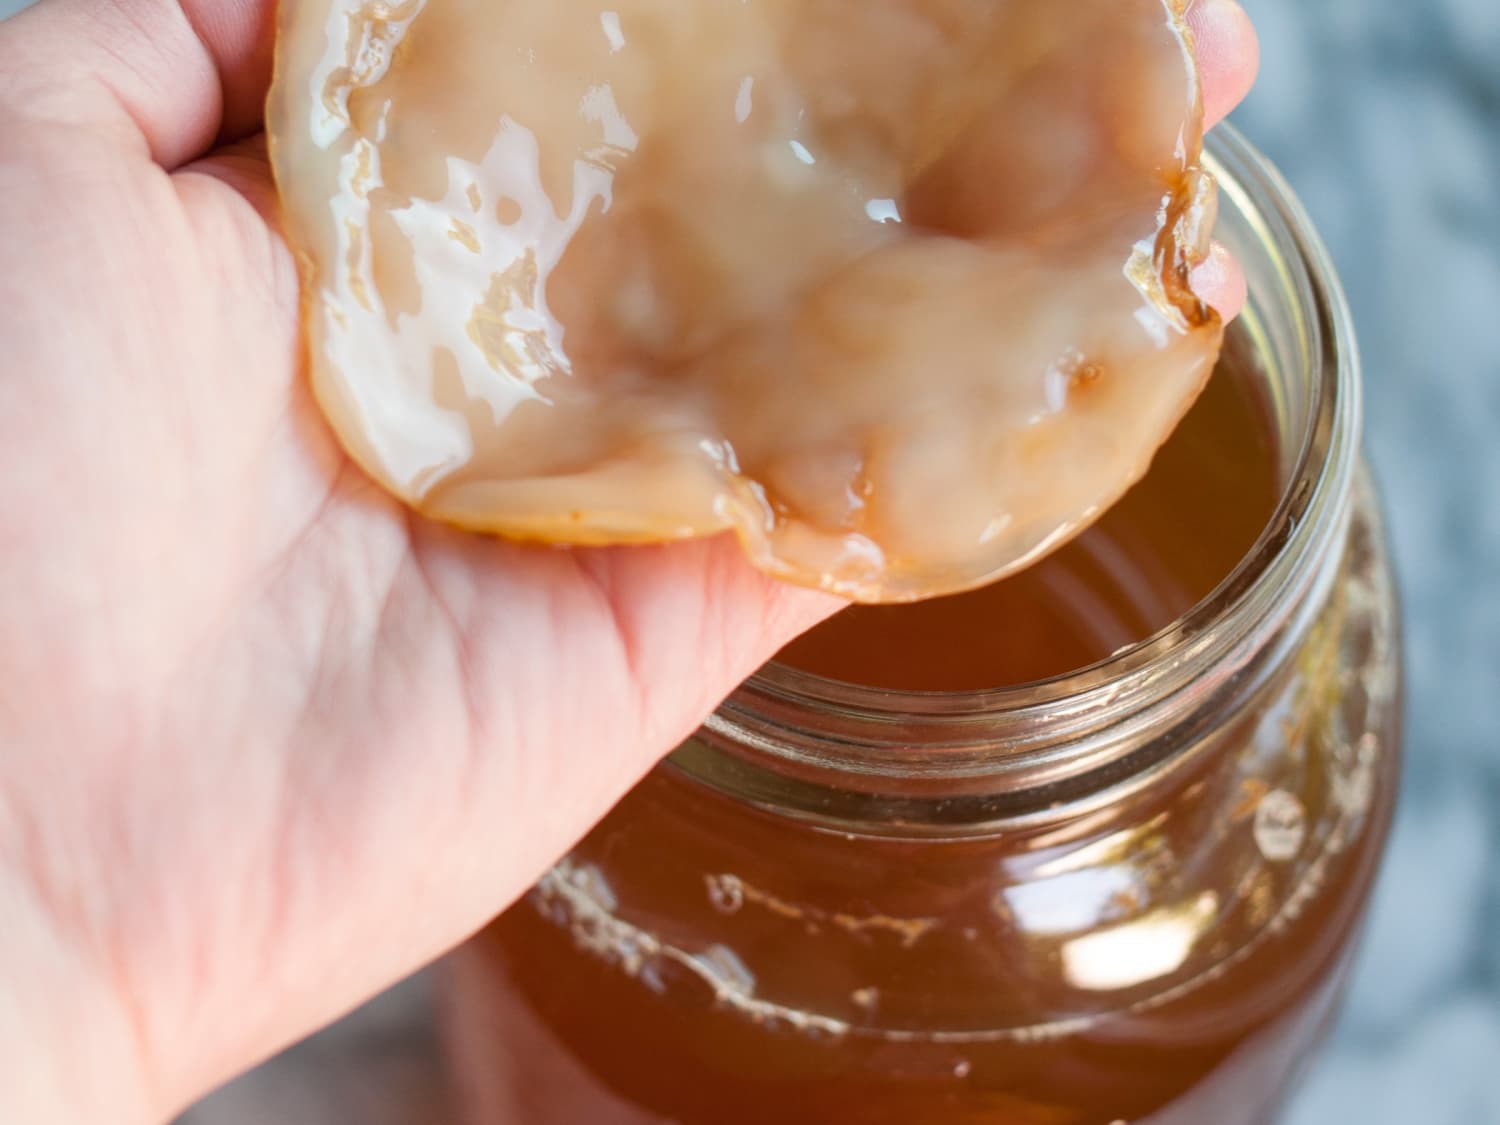 Did You Know You Can Make Clothes out of Your Kombucha Scoby?